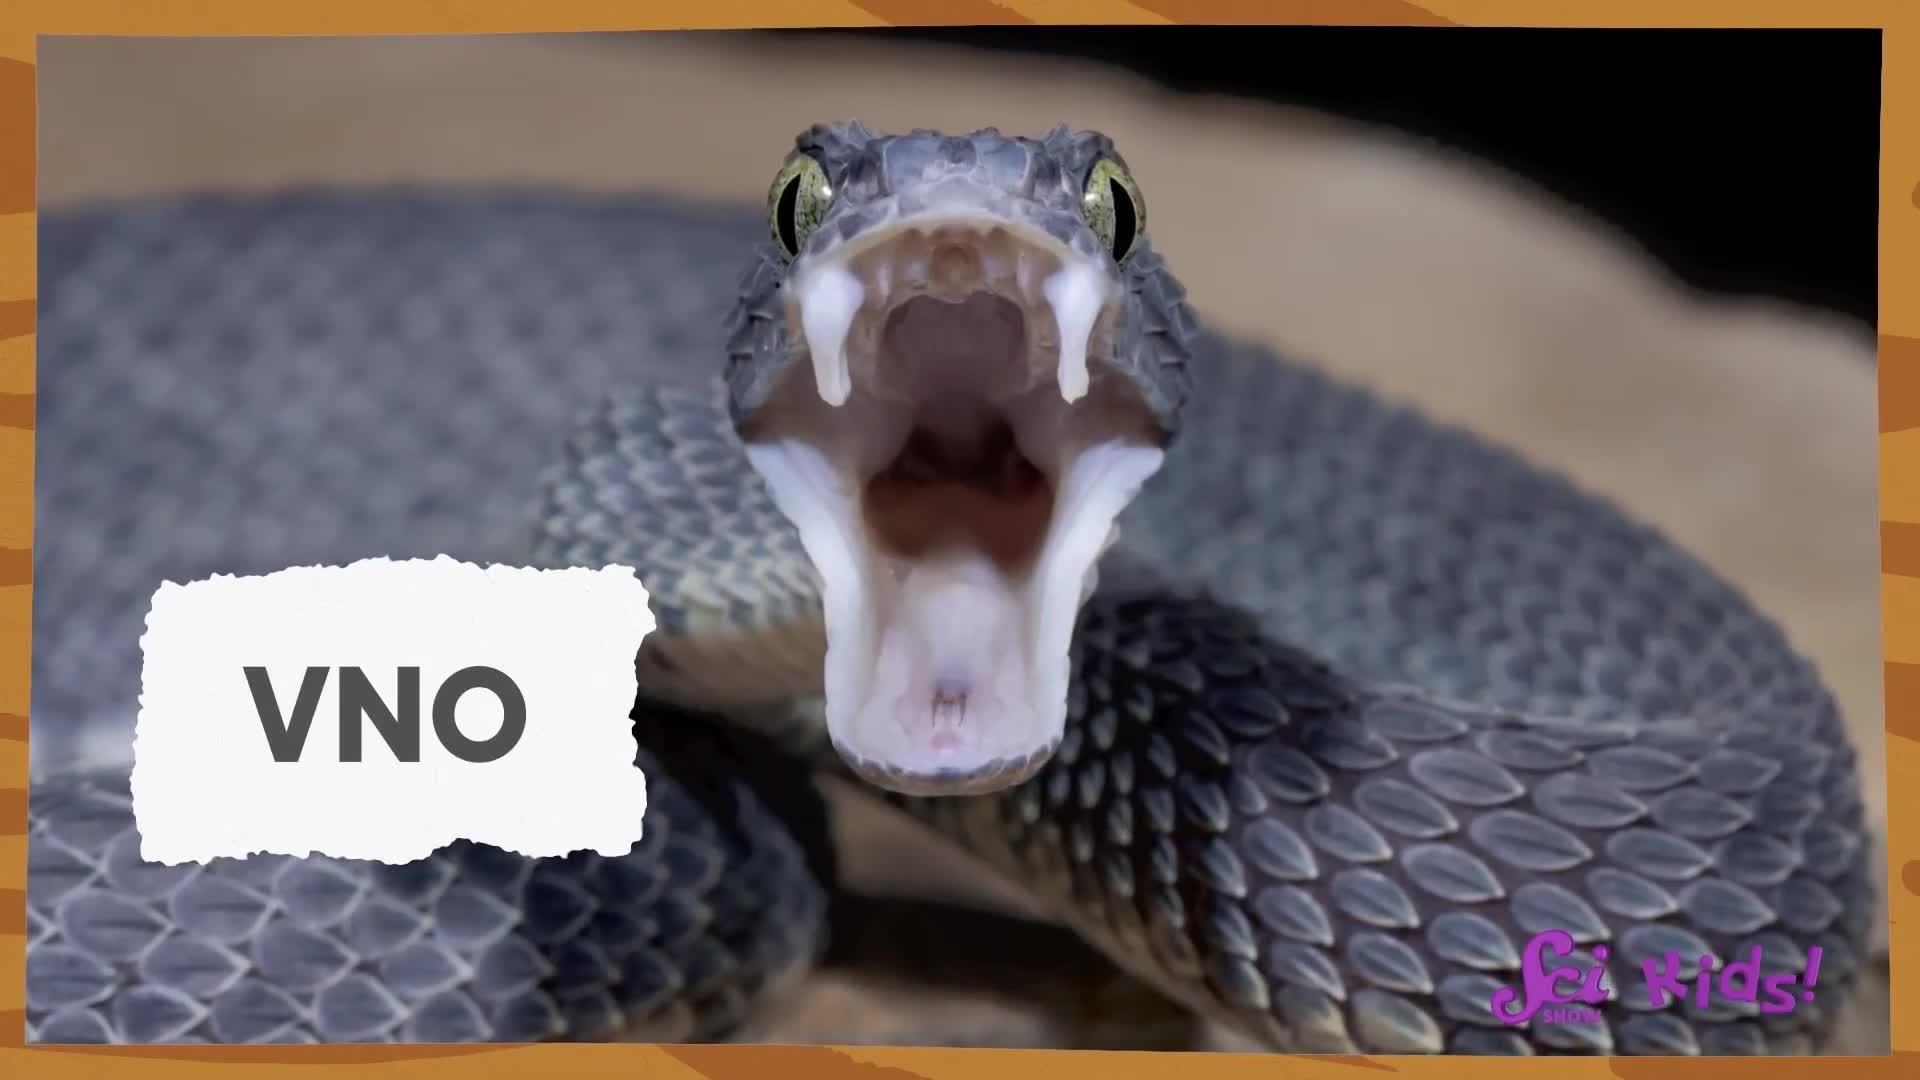 How Do Snakes Smell With Their Tongues? | Amazing Animal Senses! | SciShow Kids